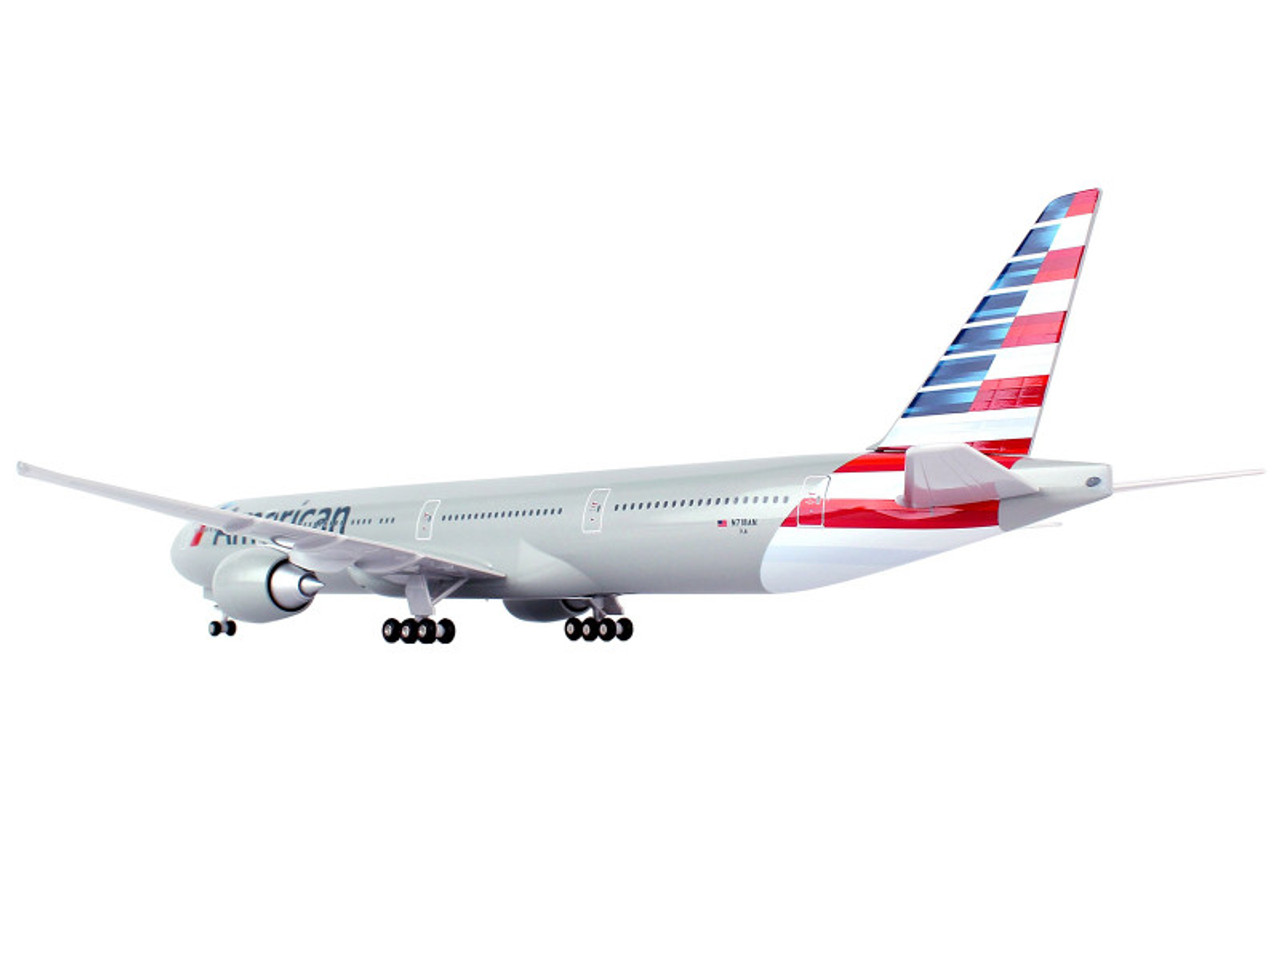 Boeing 777-300ER Commercial Aircraft with Landing Gear "American Airlines" (N718AN) Gray with Blue and Red Tail (Snap-Fit) 1/200 Plastic Model by Skymarks